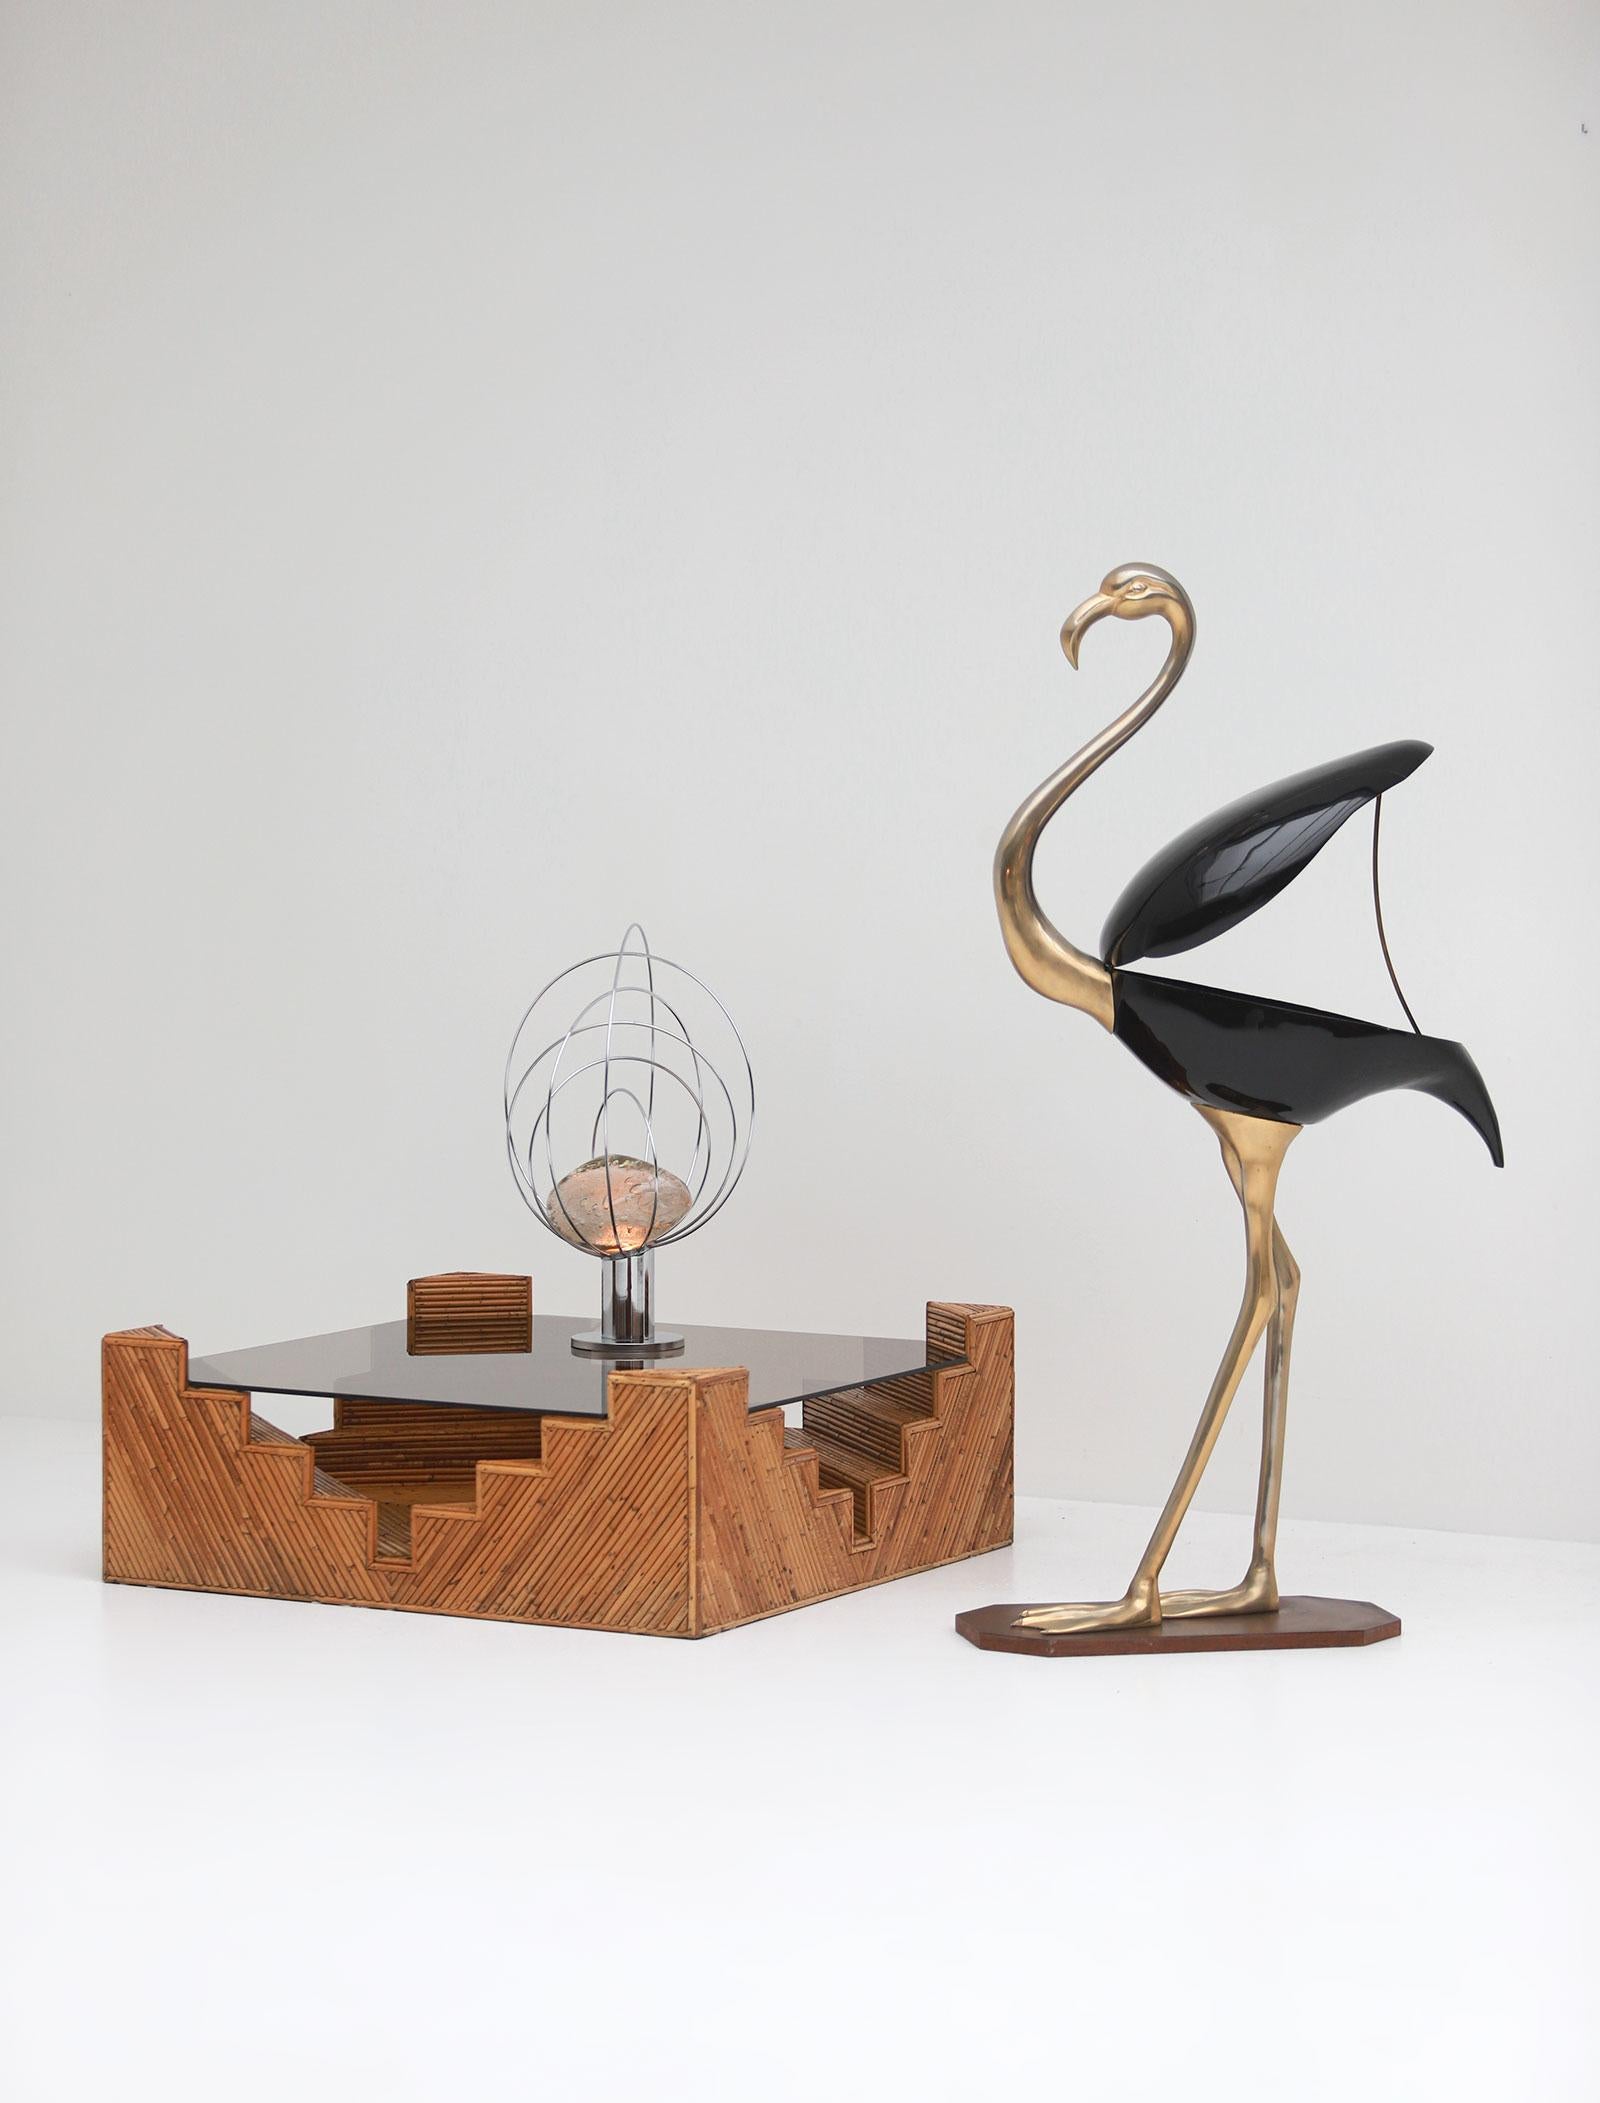 Hollywood Regency Lifesize Brass Flamingo with storage compartment by Fondica 1970s For Sale